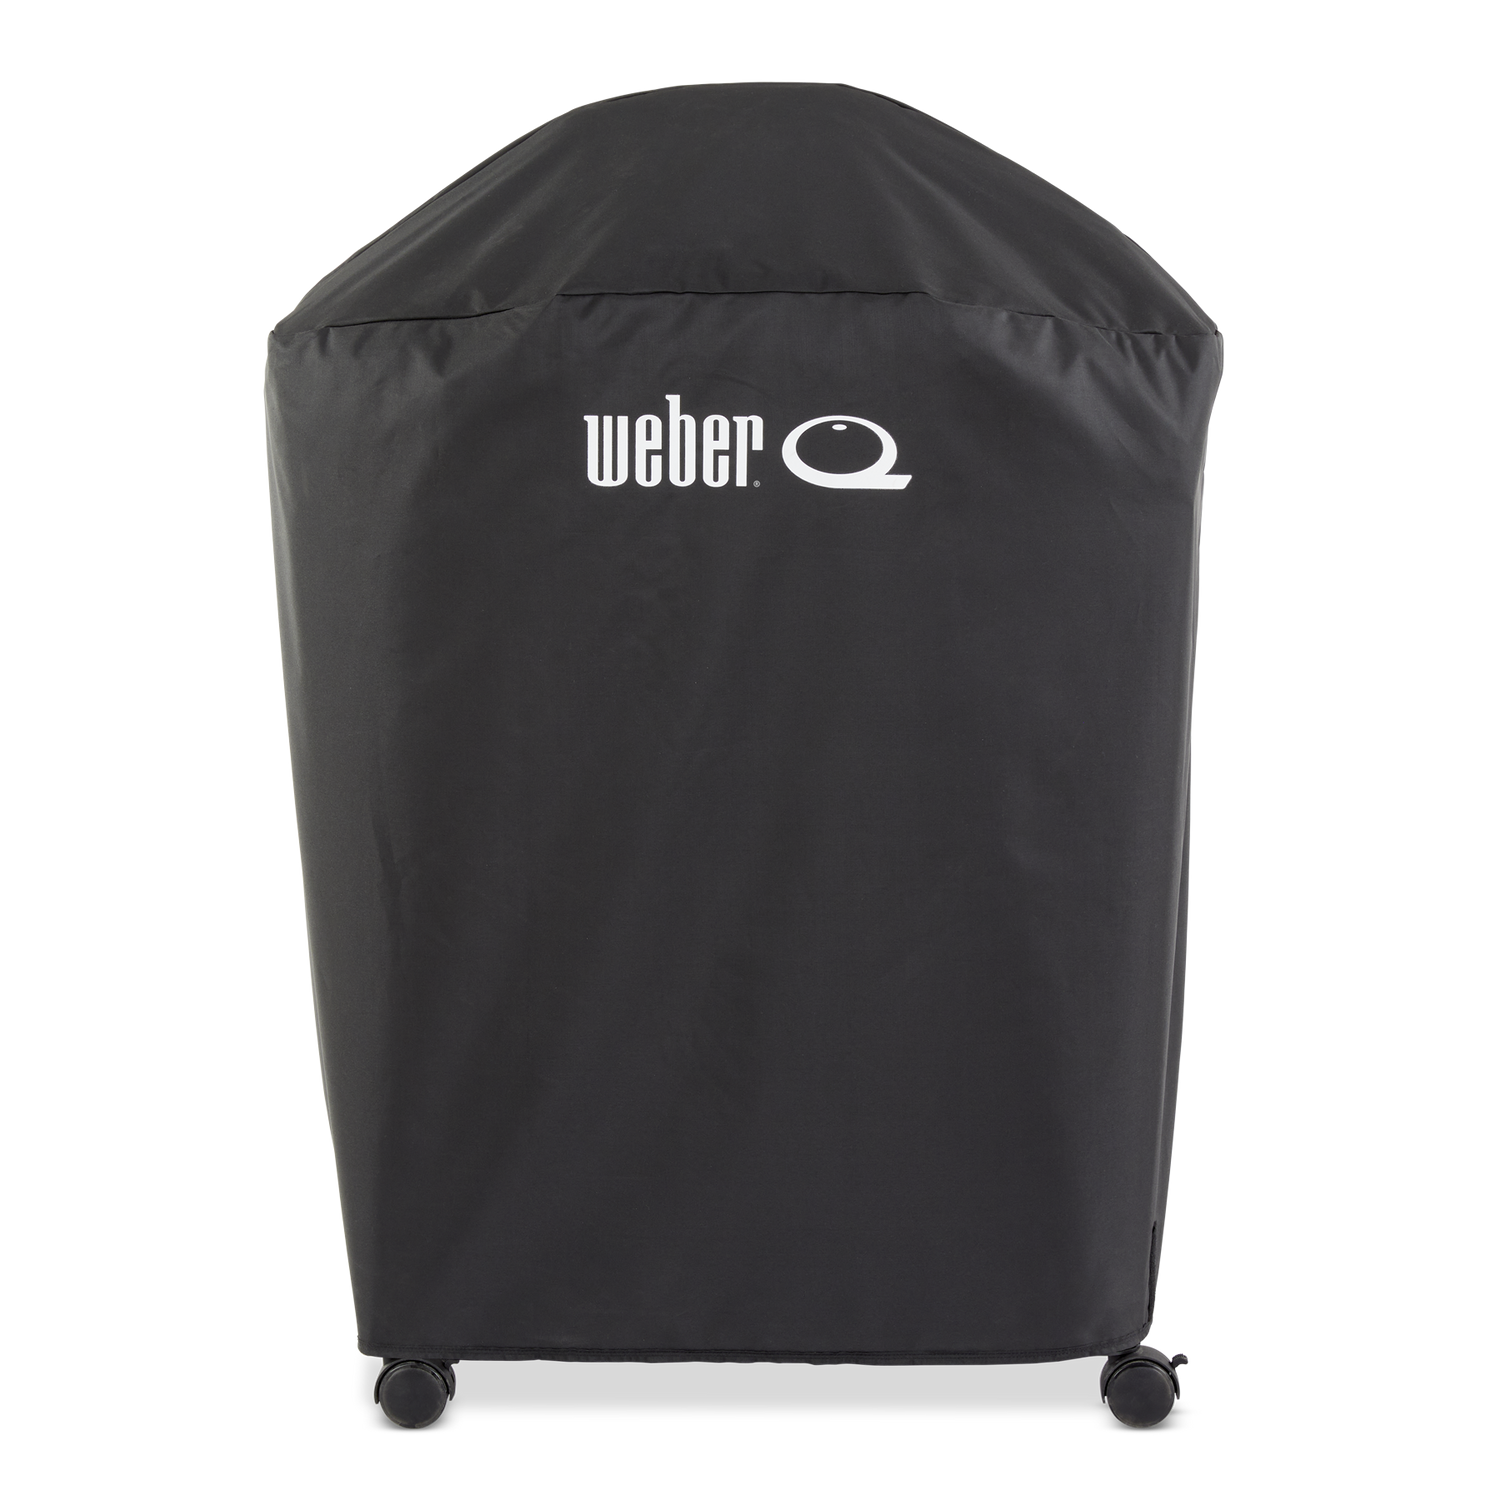 Family Q Premium barbecue and cart cover (Q3X00N)